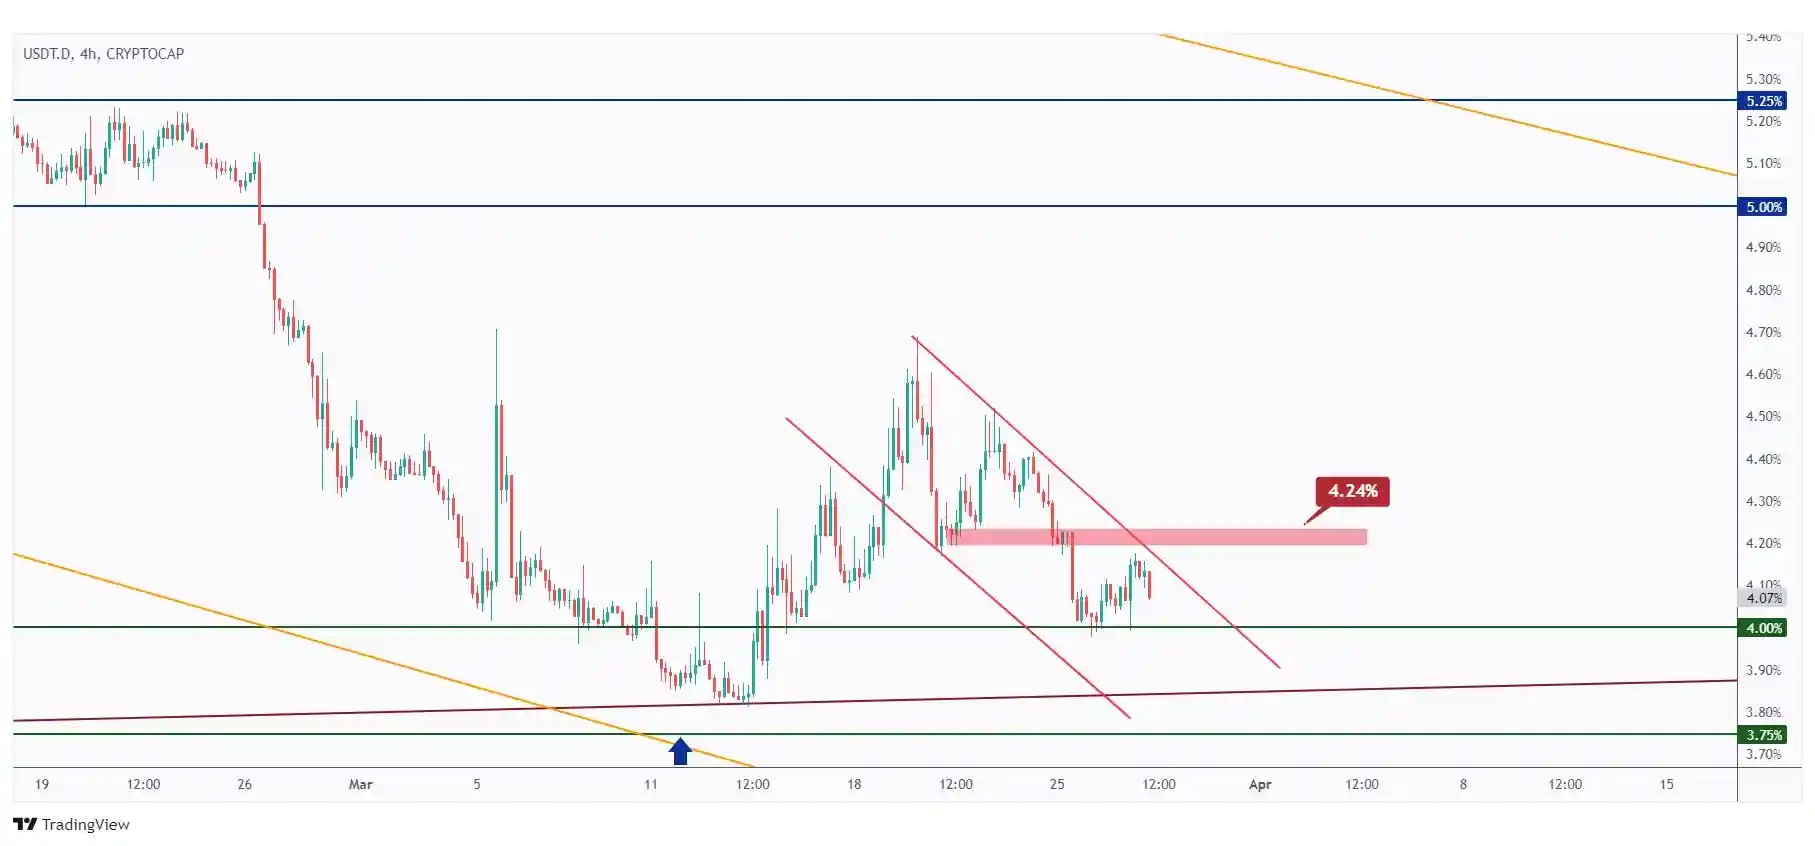 USDT.D 4h chart showing the last major high at 4.24% that we need a break above for the bulls to take over.